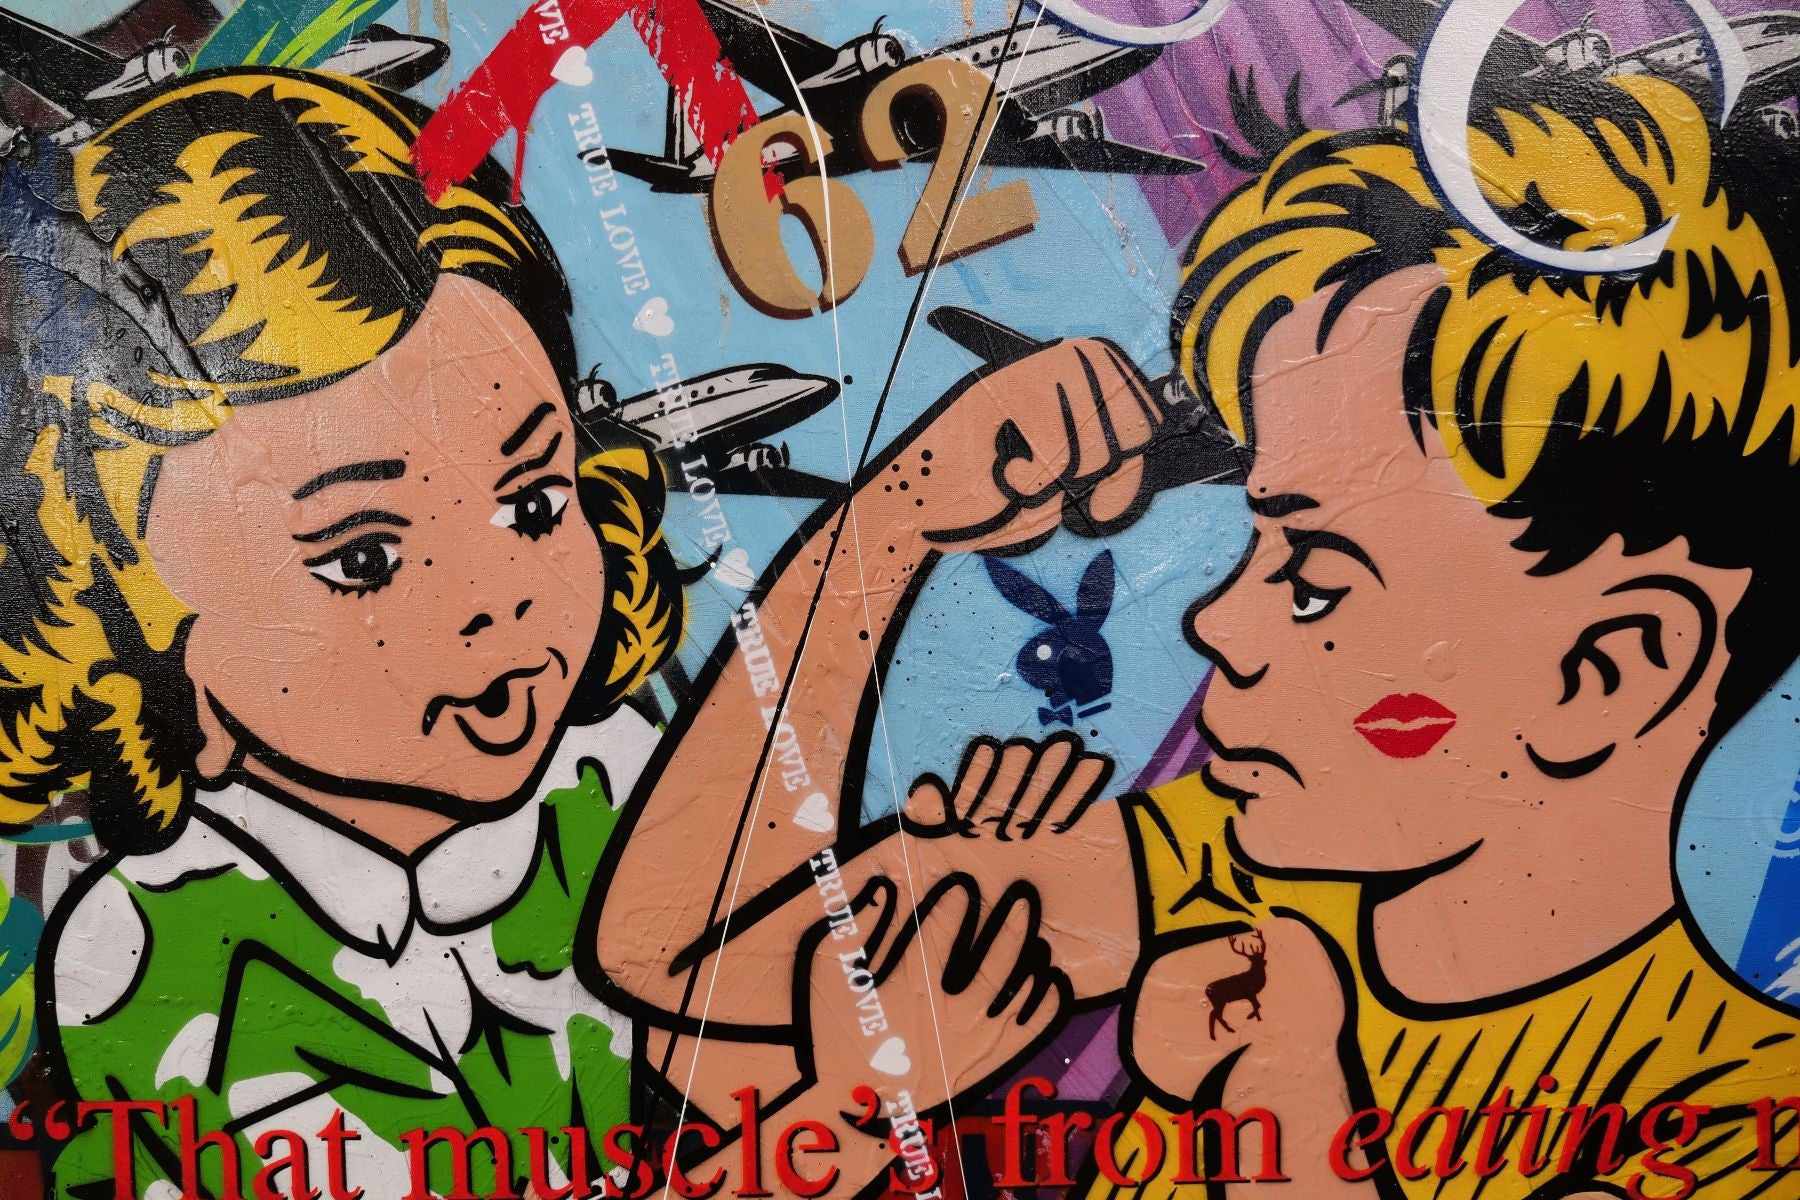 Now That's Some Muscle 120cm x 150cm Carnation Milk Muscle Textured Urban Pop Art Painting (SOLD)